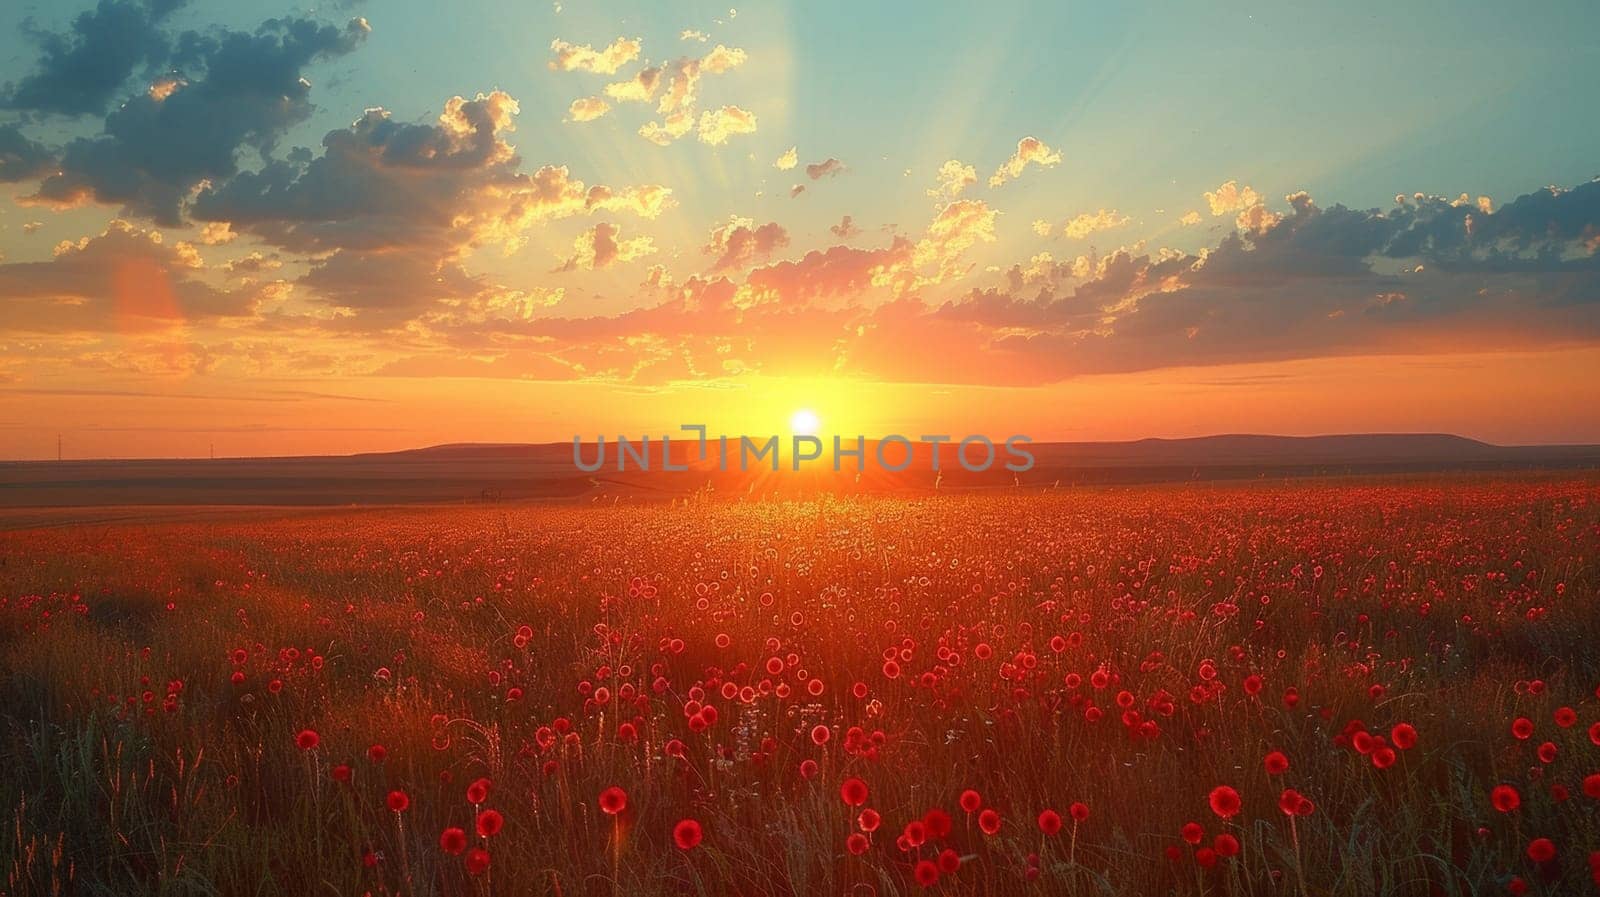 A field of red flowers with the sun setting in the background